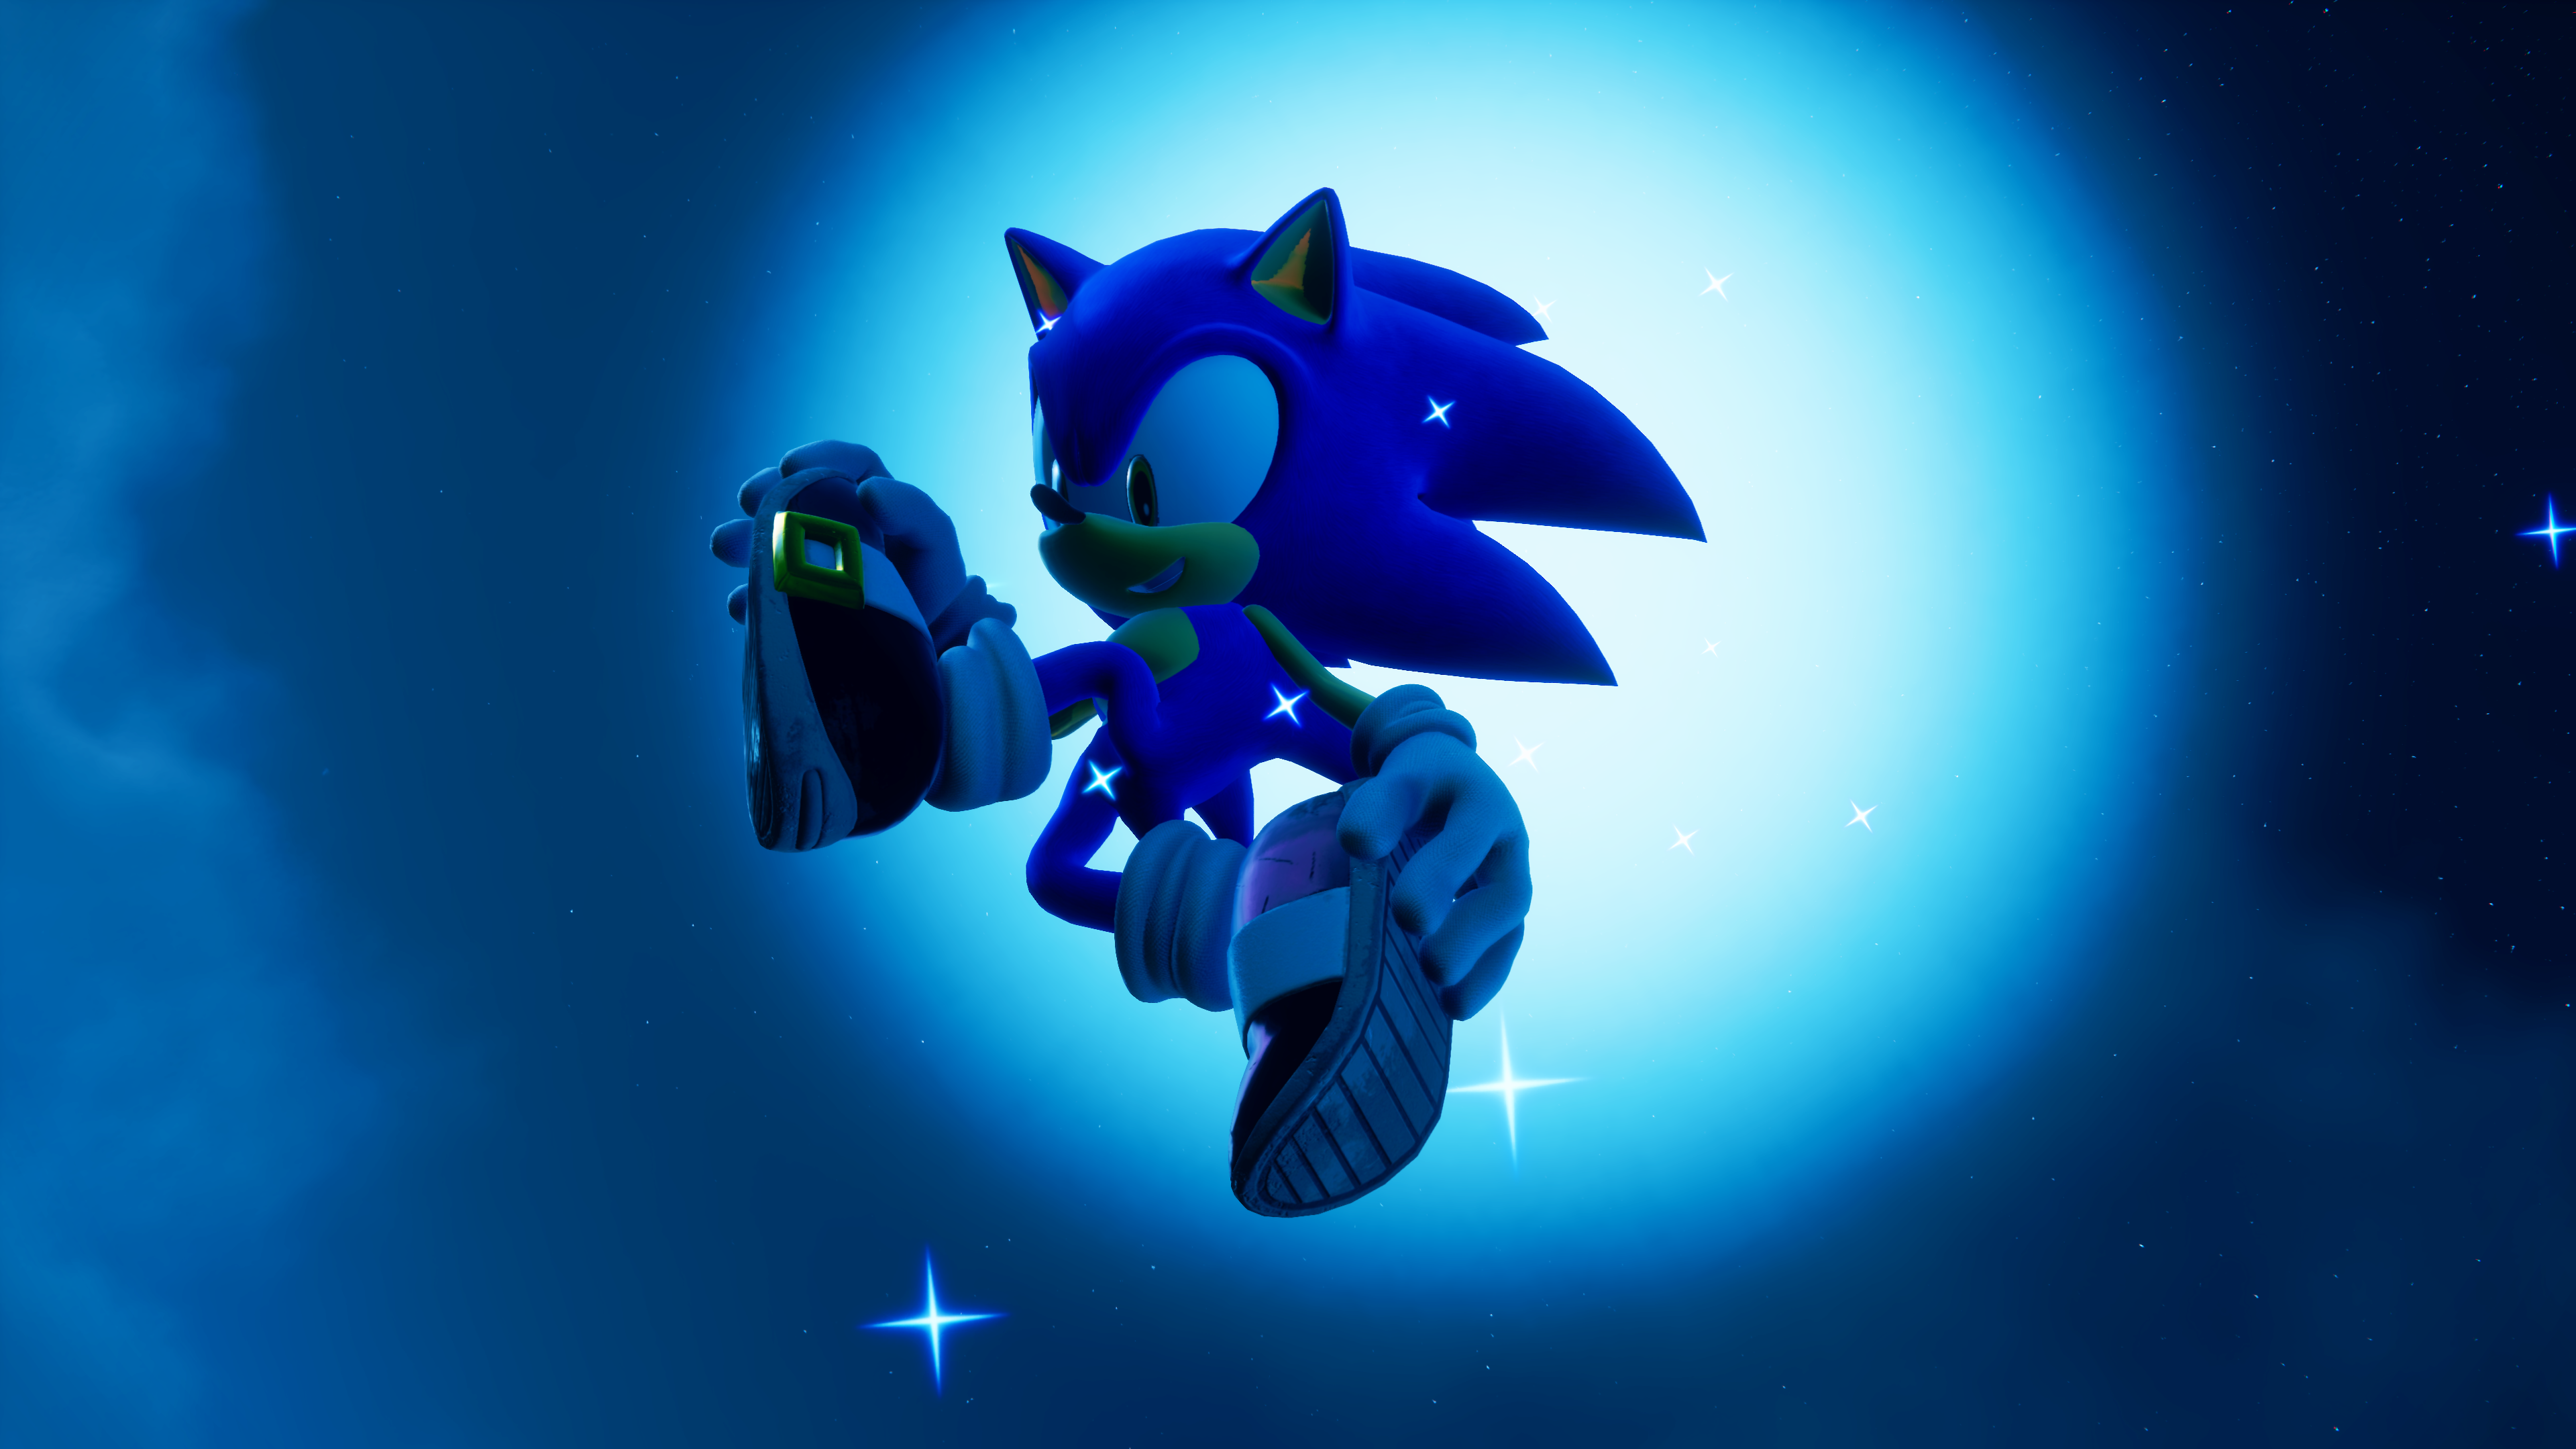 Sonic Frontiers Update 2 Release Date Revealed - News